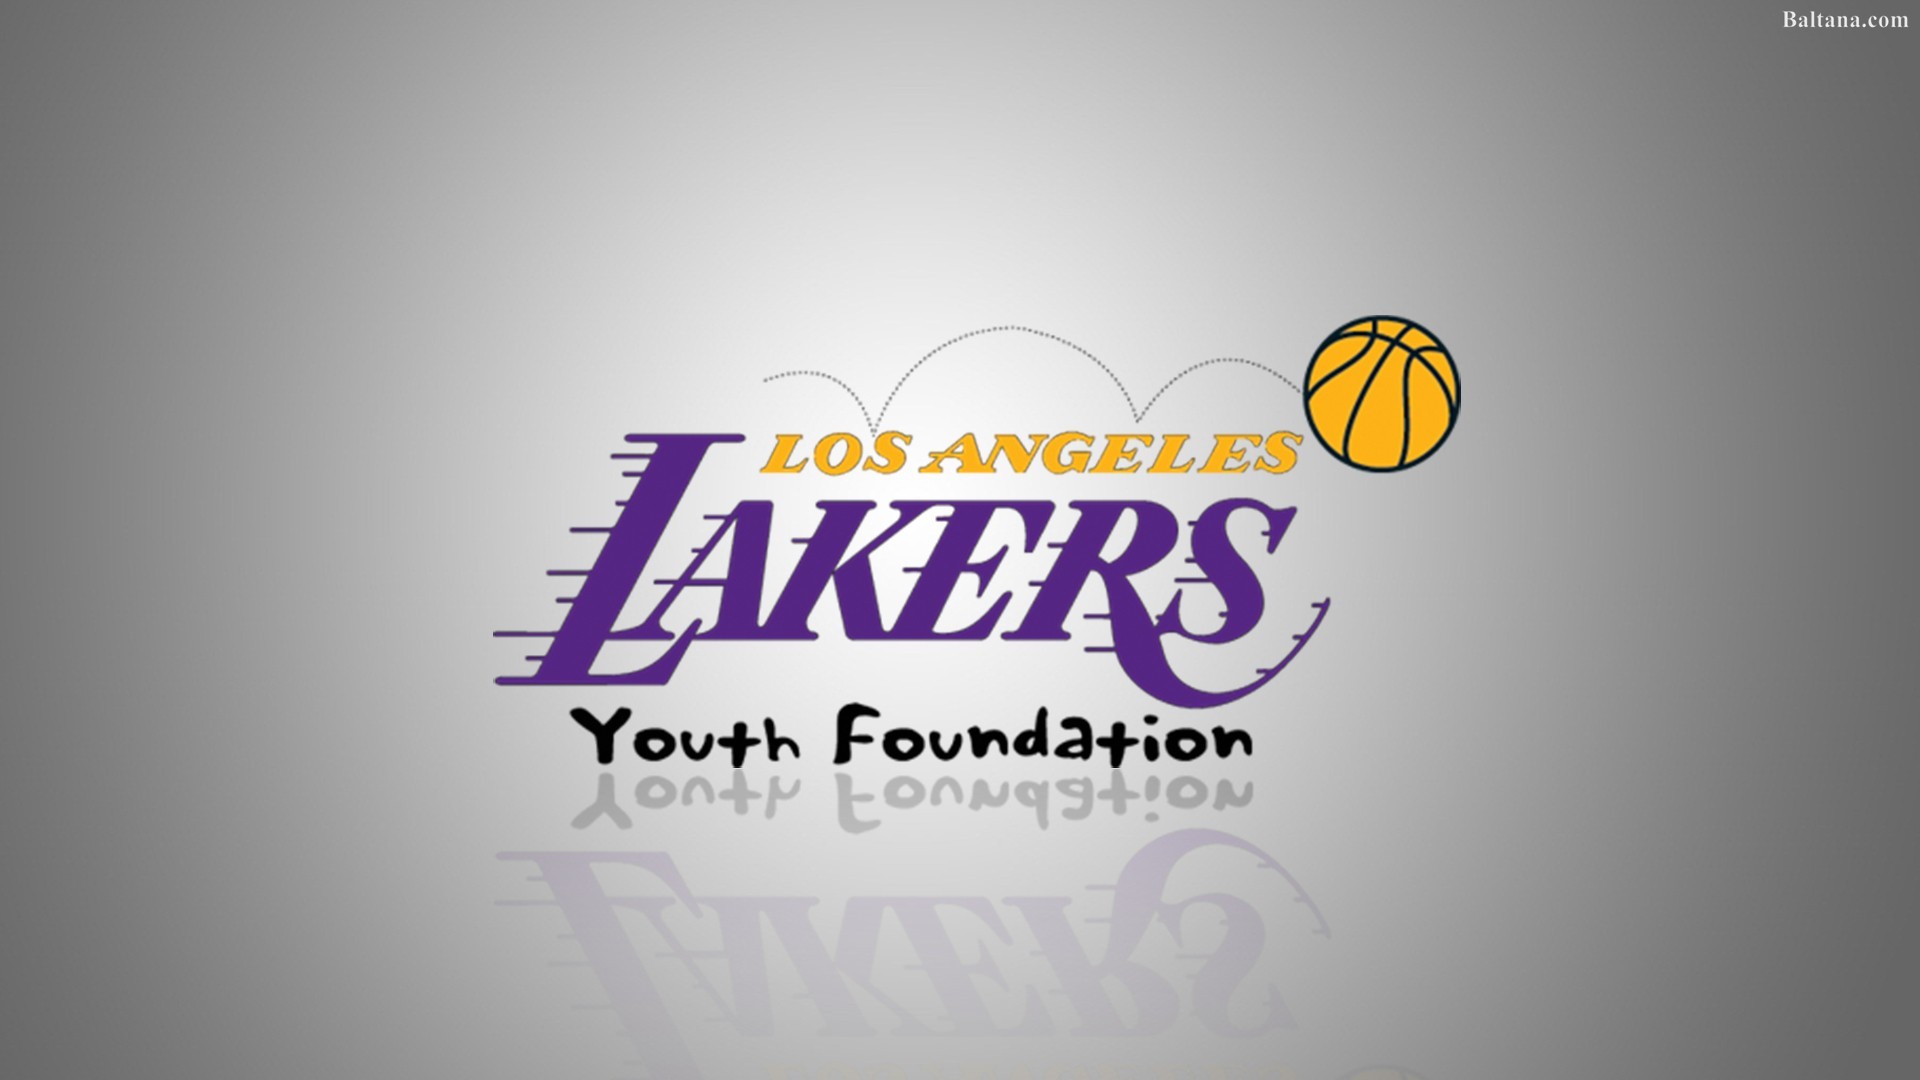 1920x1080 Los Angeles Lakers Background Wallpaper 33516